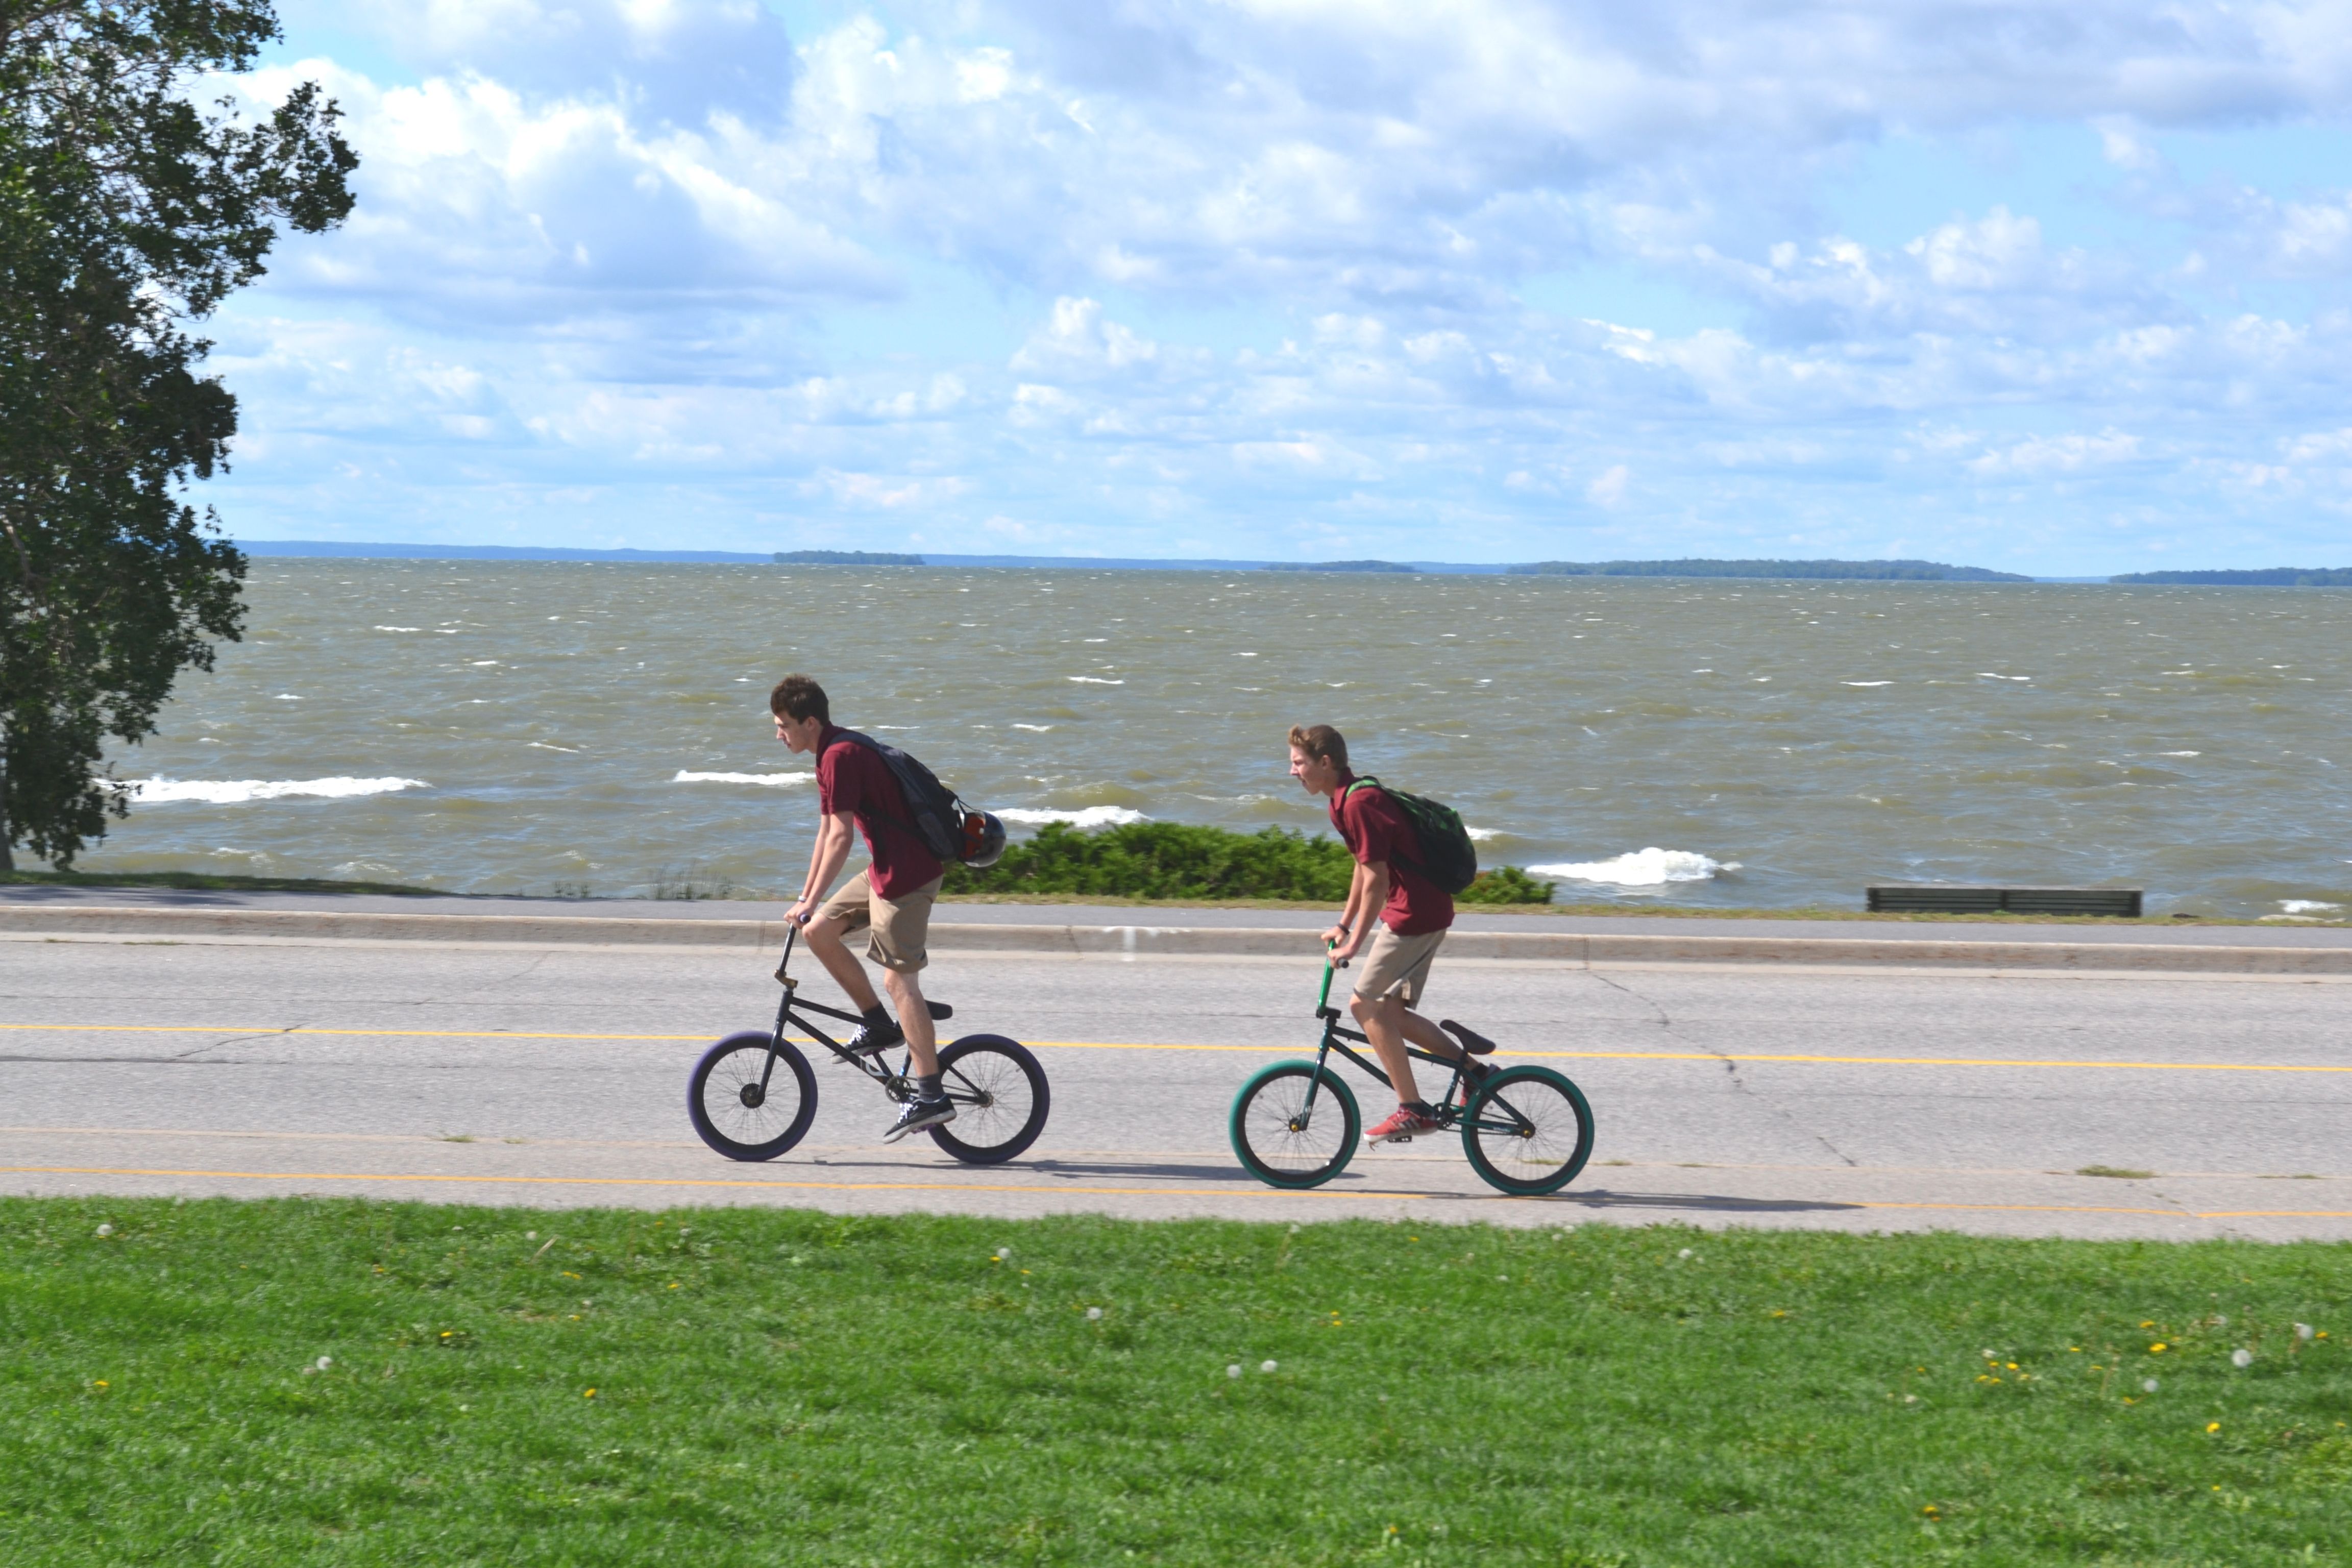 Two boys on bikes ride down a paved bike trail along Lake Nipissing on a summer day.